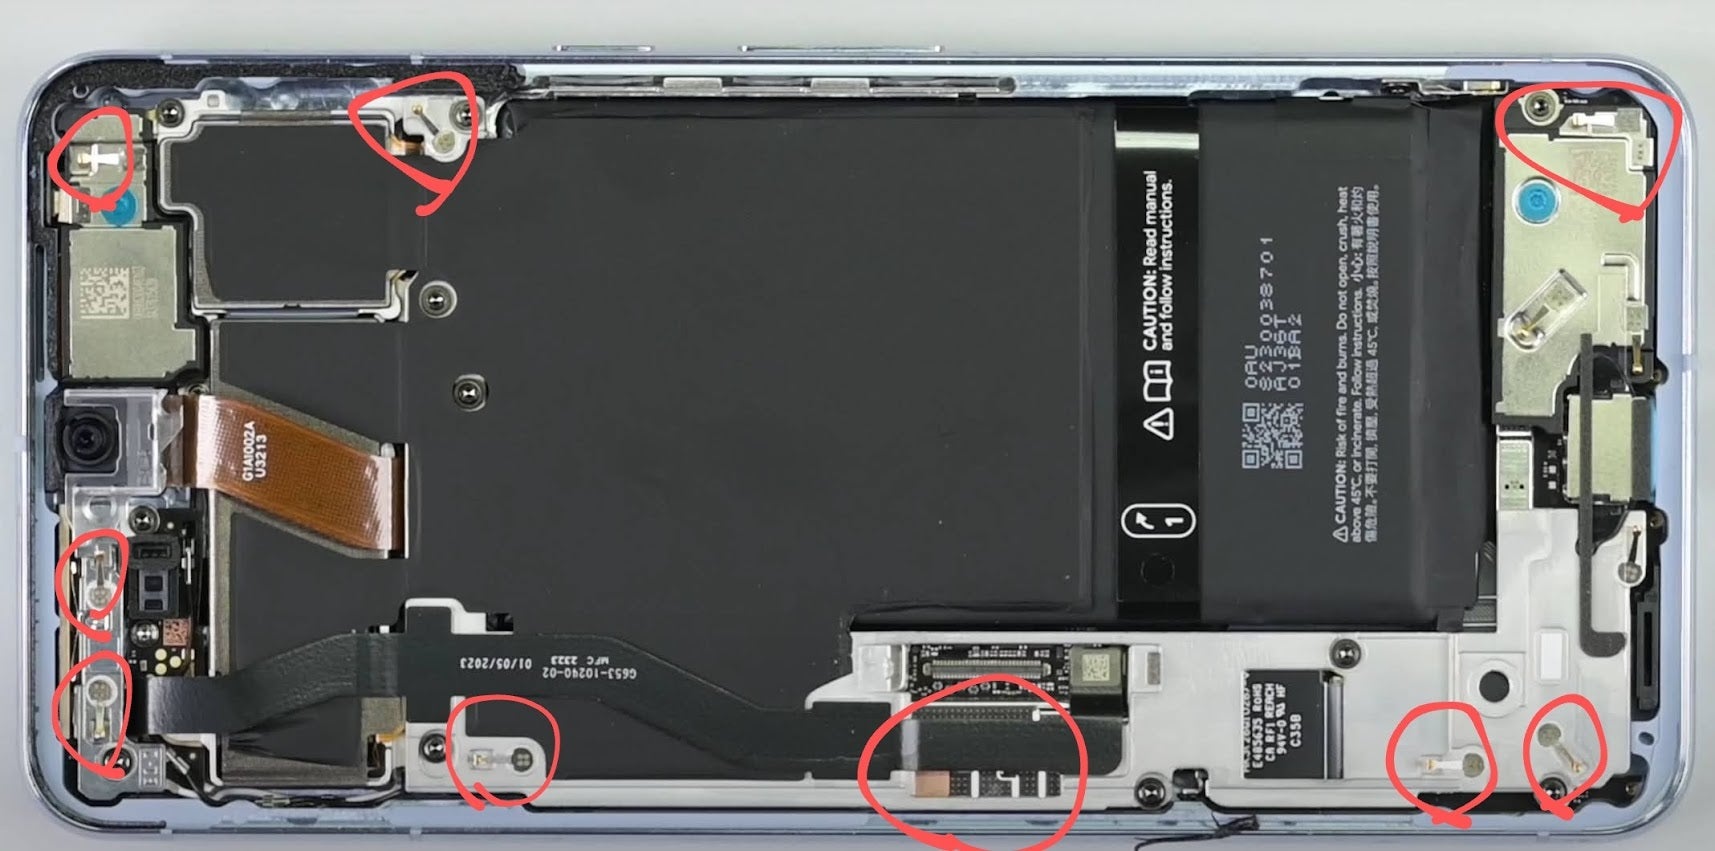 One theory is that screws used inside the phones are being pushed up toward the affected displays - Pixel 8 and Pixel 8 Pro users are finding strange bumps and dents under their displays (UPDATE)